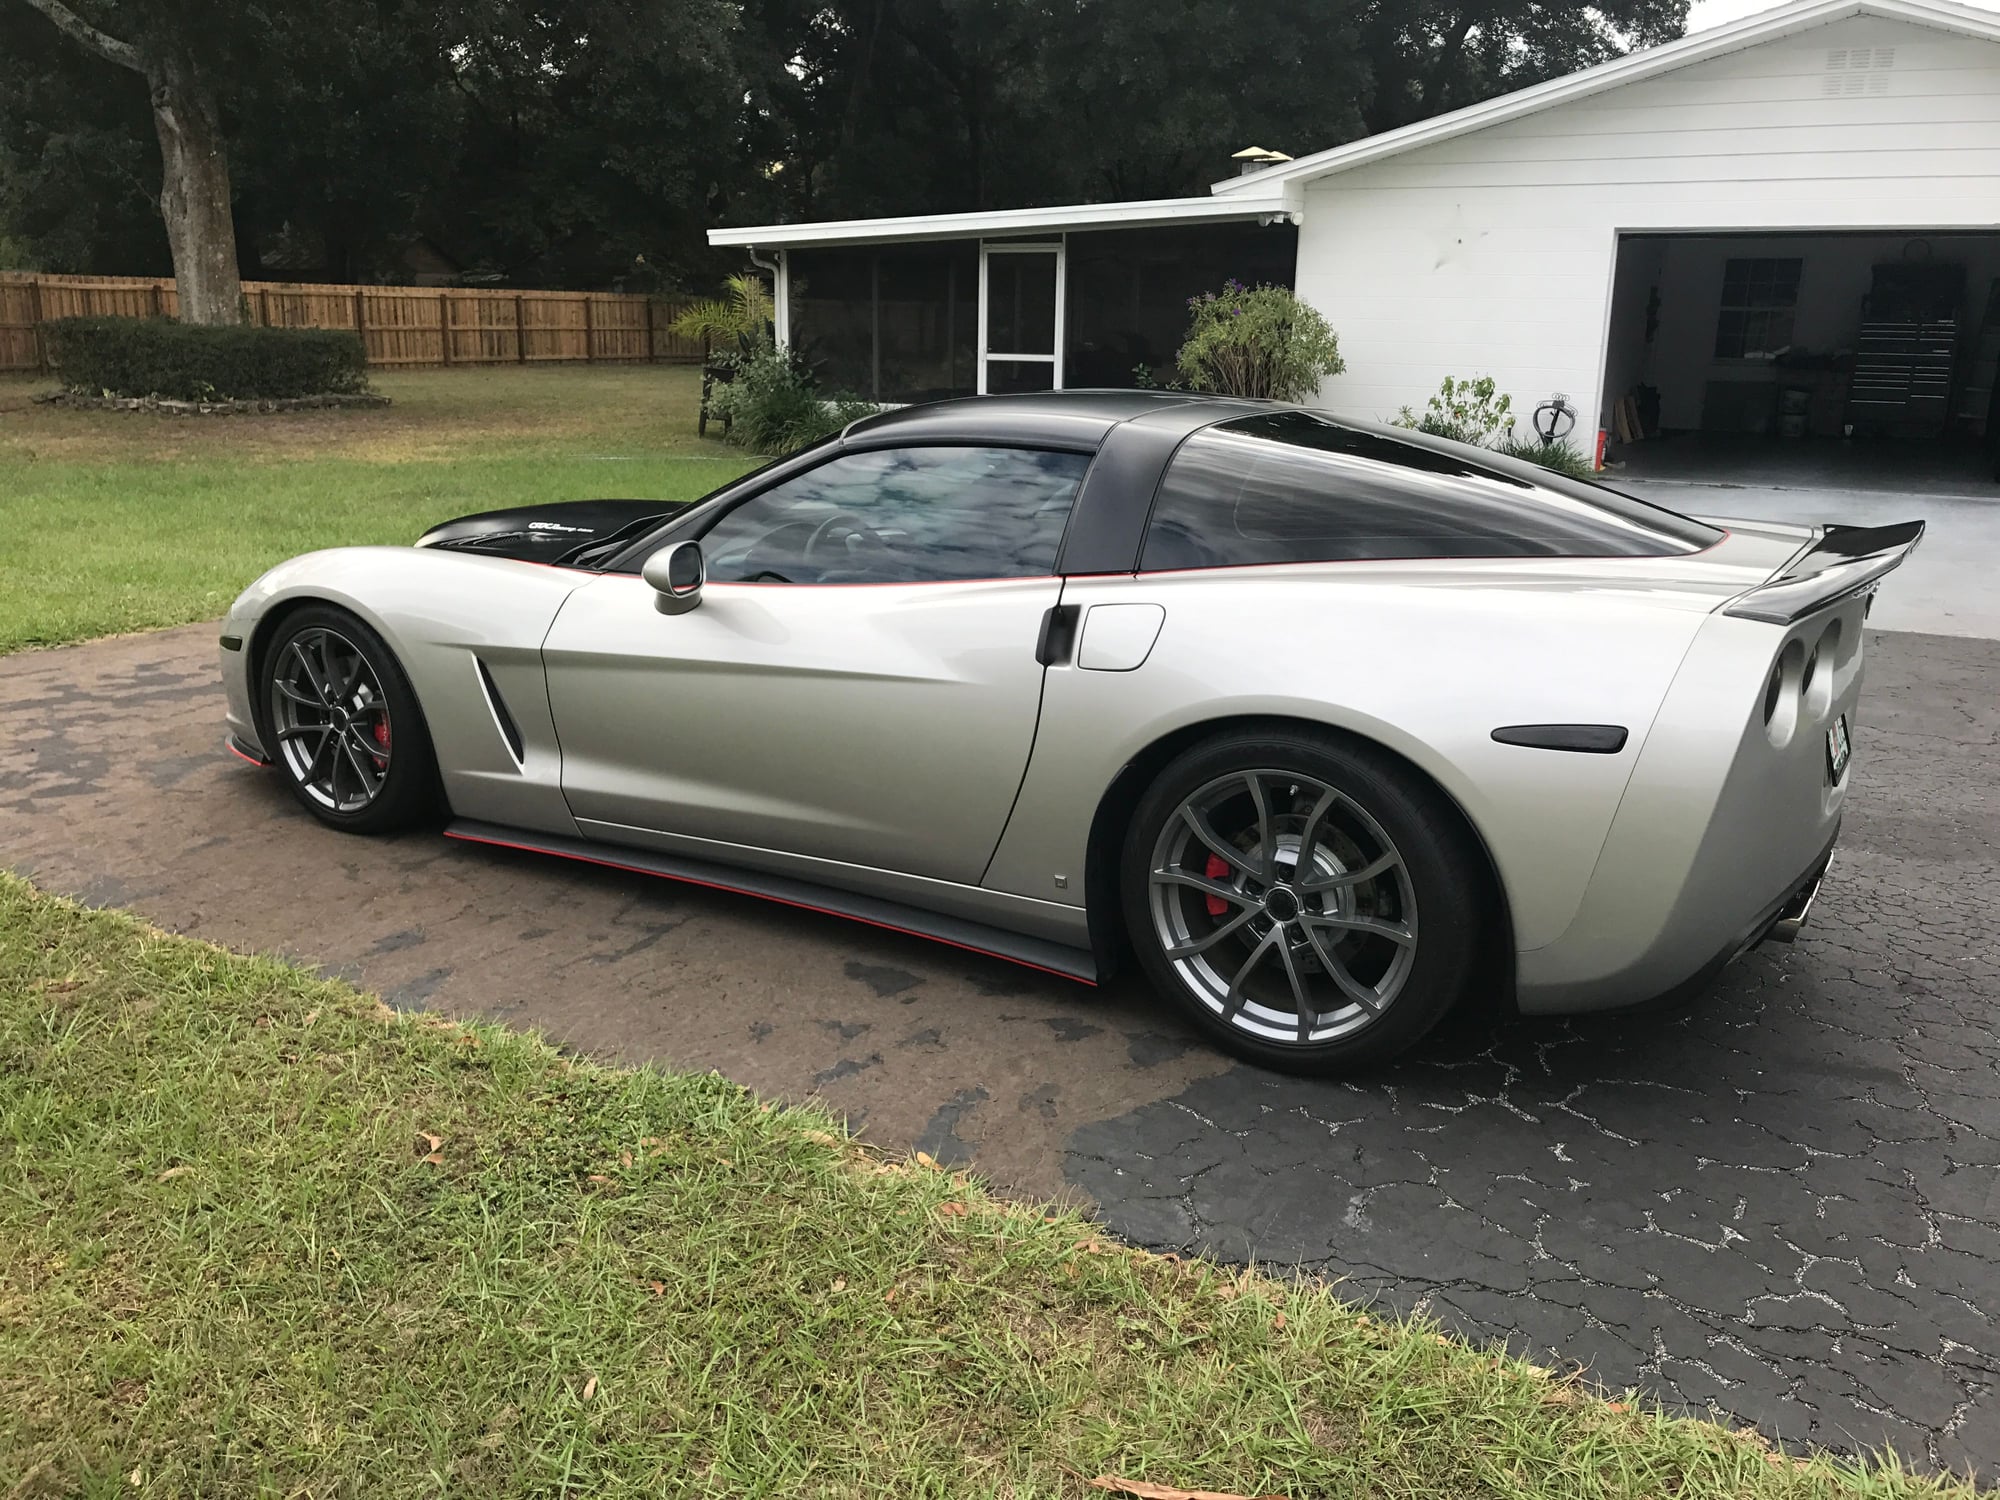 2006 Chevy Corvette LS2 6-speed manual with 50